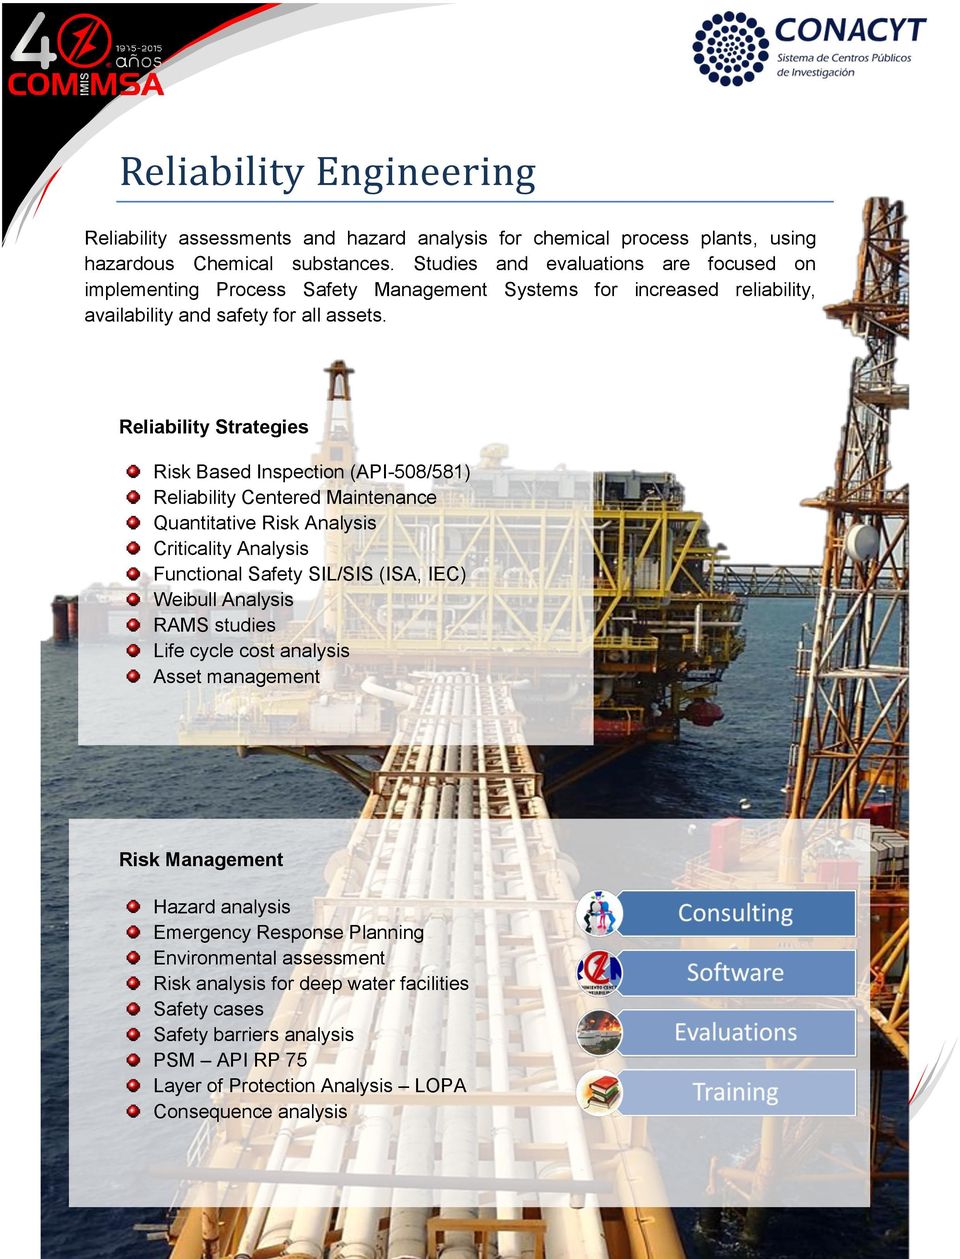 Reliability Strategies Risk Based Inspection (API-508/581) Reliability Centered Maintenance Quantitative Risk Analysis Criticality Analysis Functional Safety SIL/SIS (ISA, IEC) Weibull